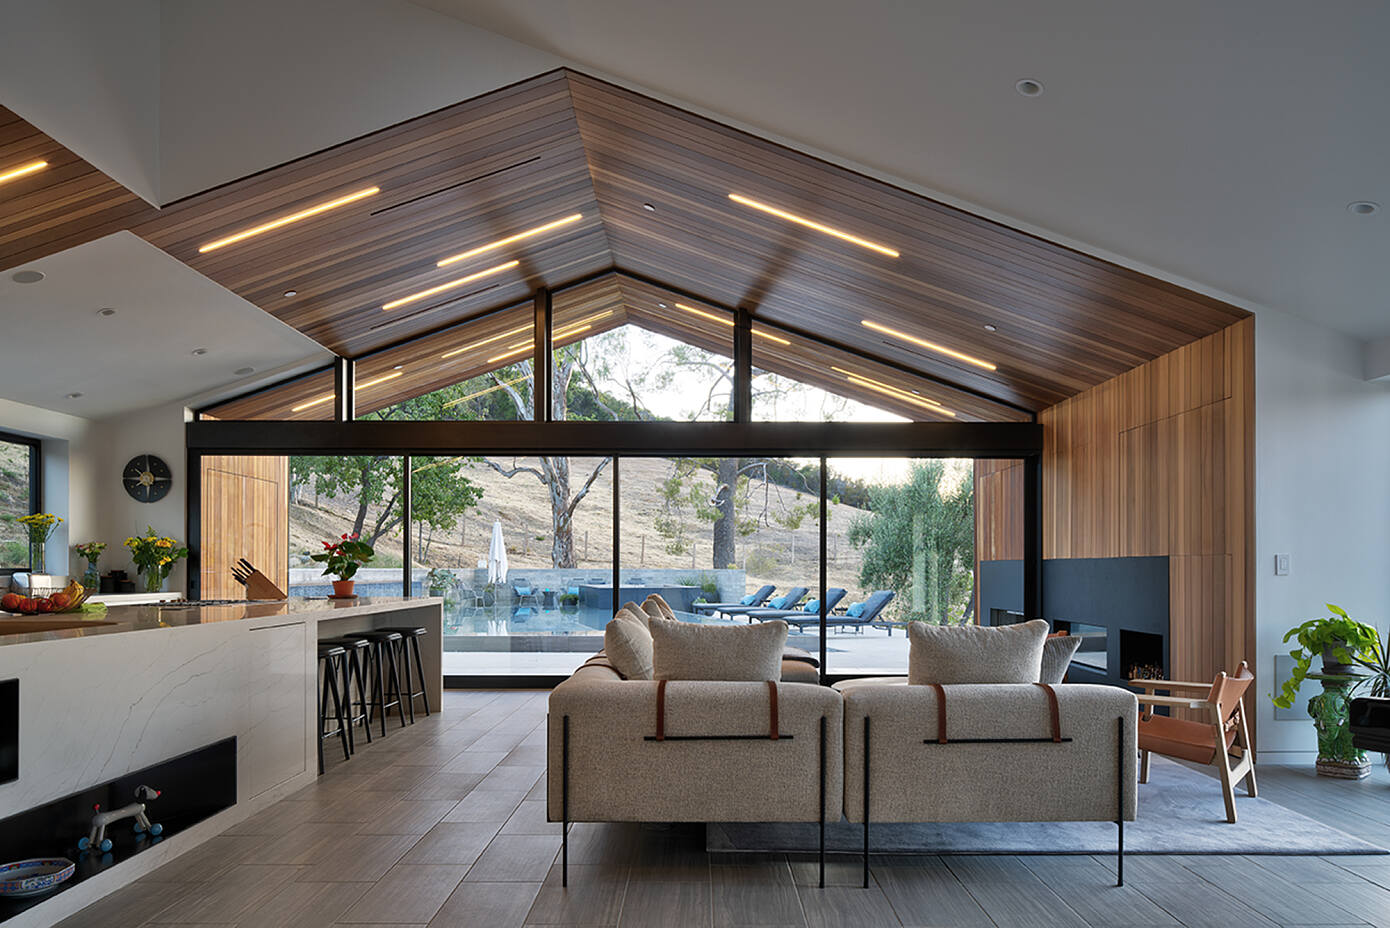 Saddle Peak Residence by Aux Architecture